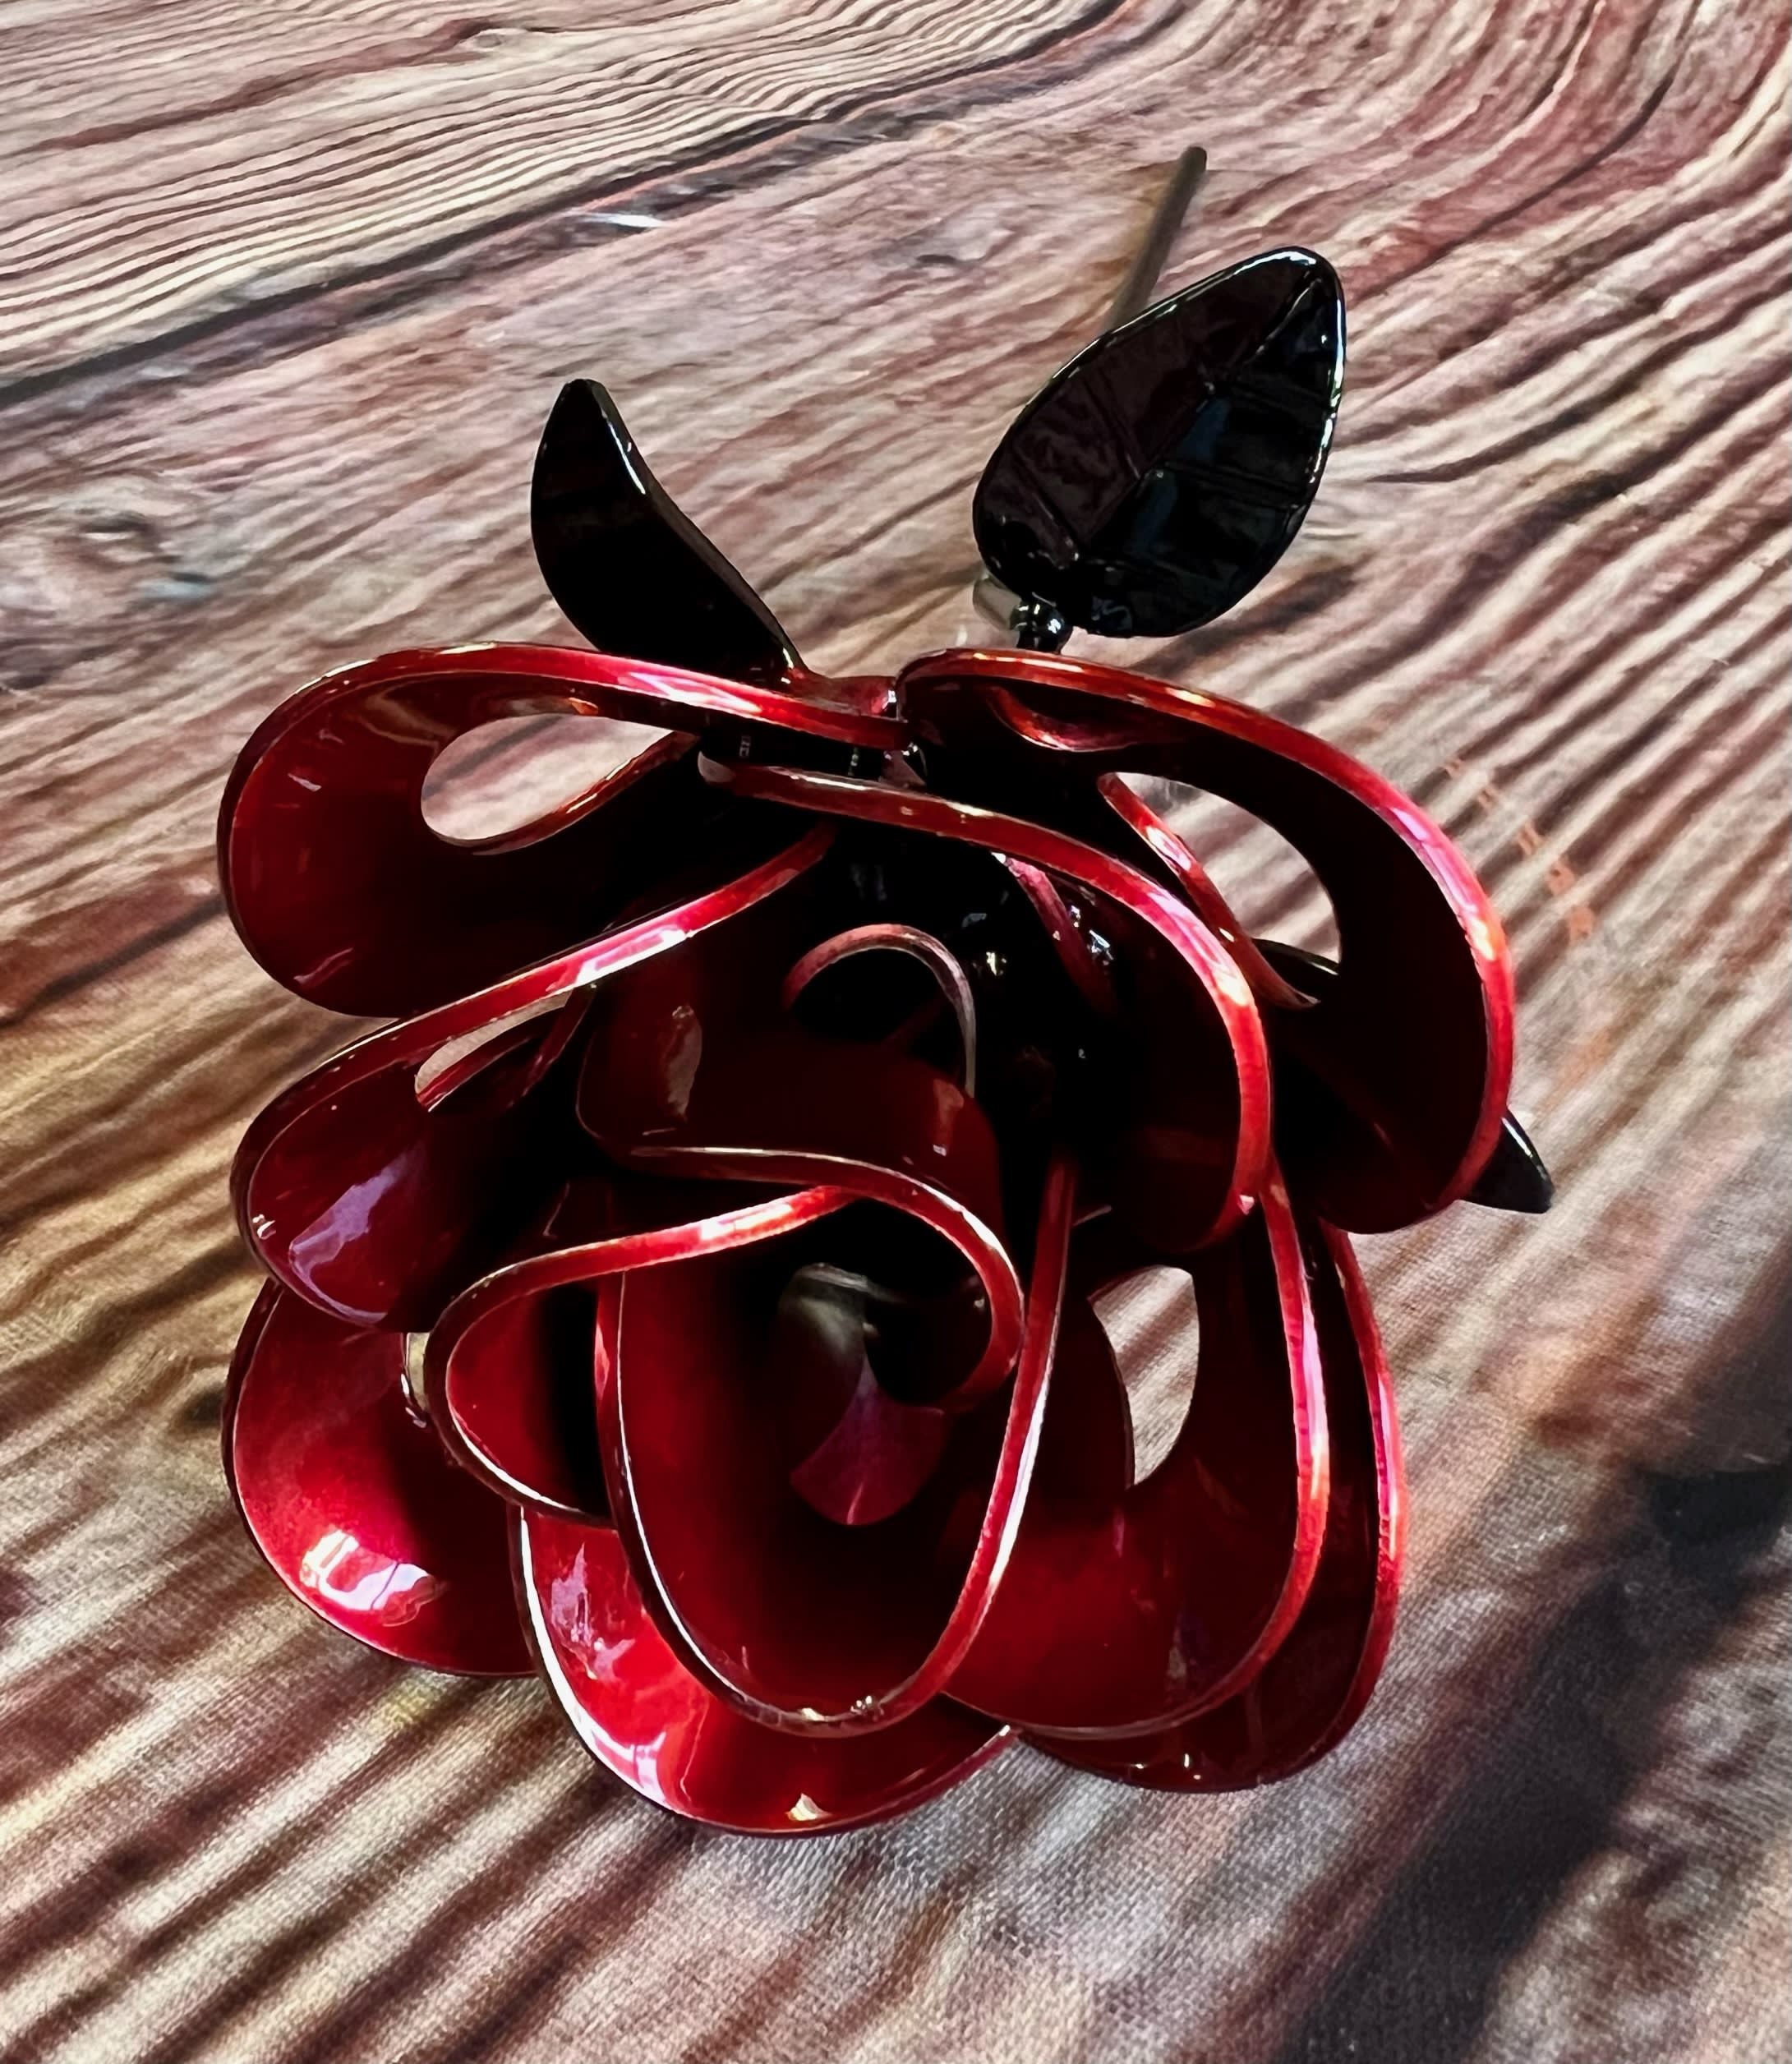 Immortal rose - Immortal metal roses are the perfect gift for the important one in your life. These artfully sculpted roses are crafted by bending, cutting and welding stainless steel washers. Every rose is unique and made from recycled materials.  12&quot; and powder-coated for an ever lasting shine and individually packaged. The rose color is a lustrous red with a flat matte black stem and leaf. Please specify color desired in special instructions. Available in 3 colors -metal and red &amp; black.